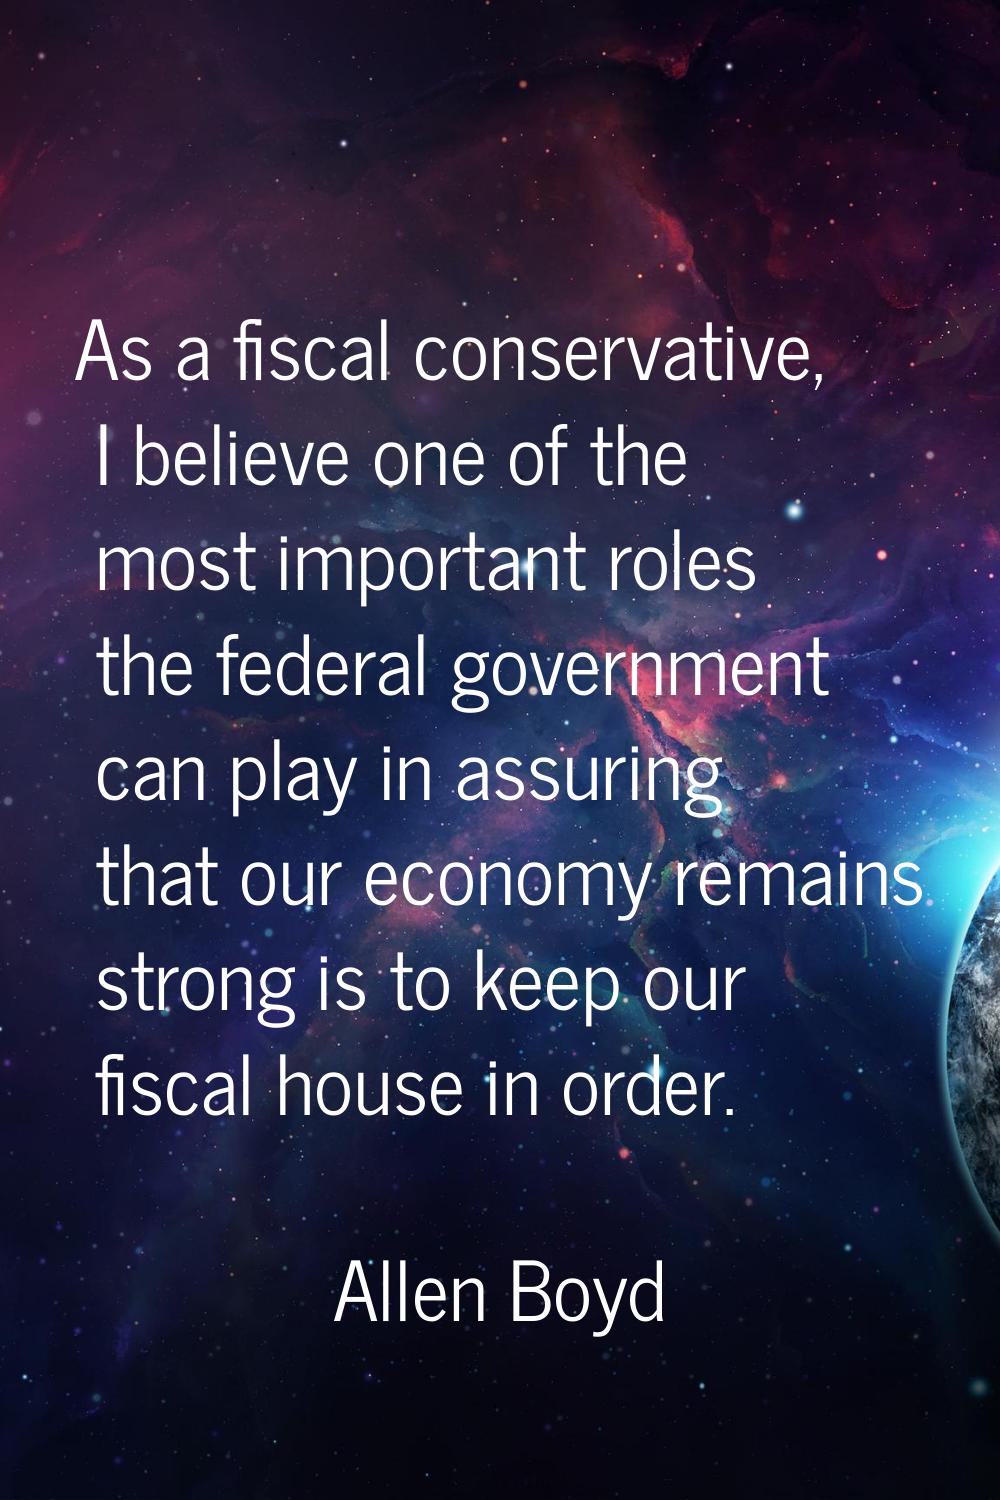 As a fiscal conservative, I believe one of the most important roles the federal government can play